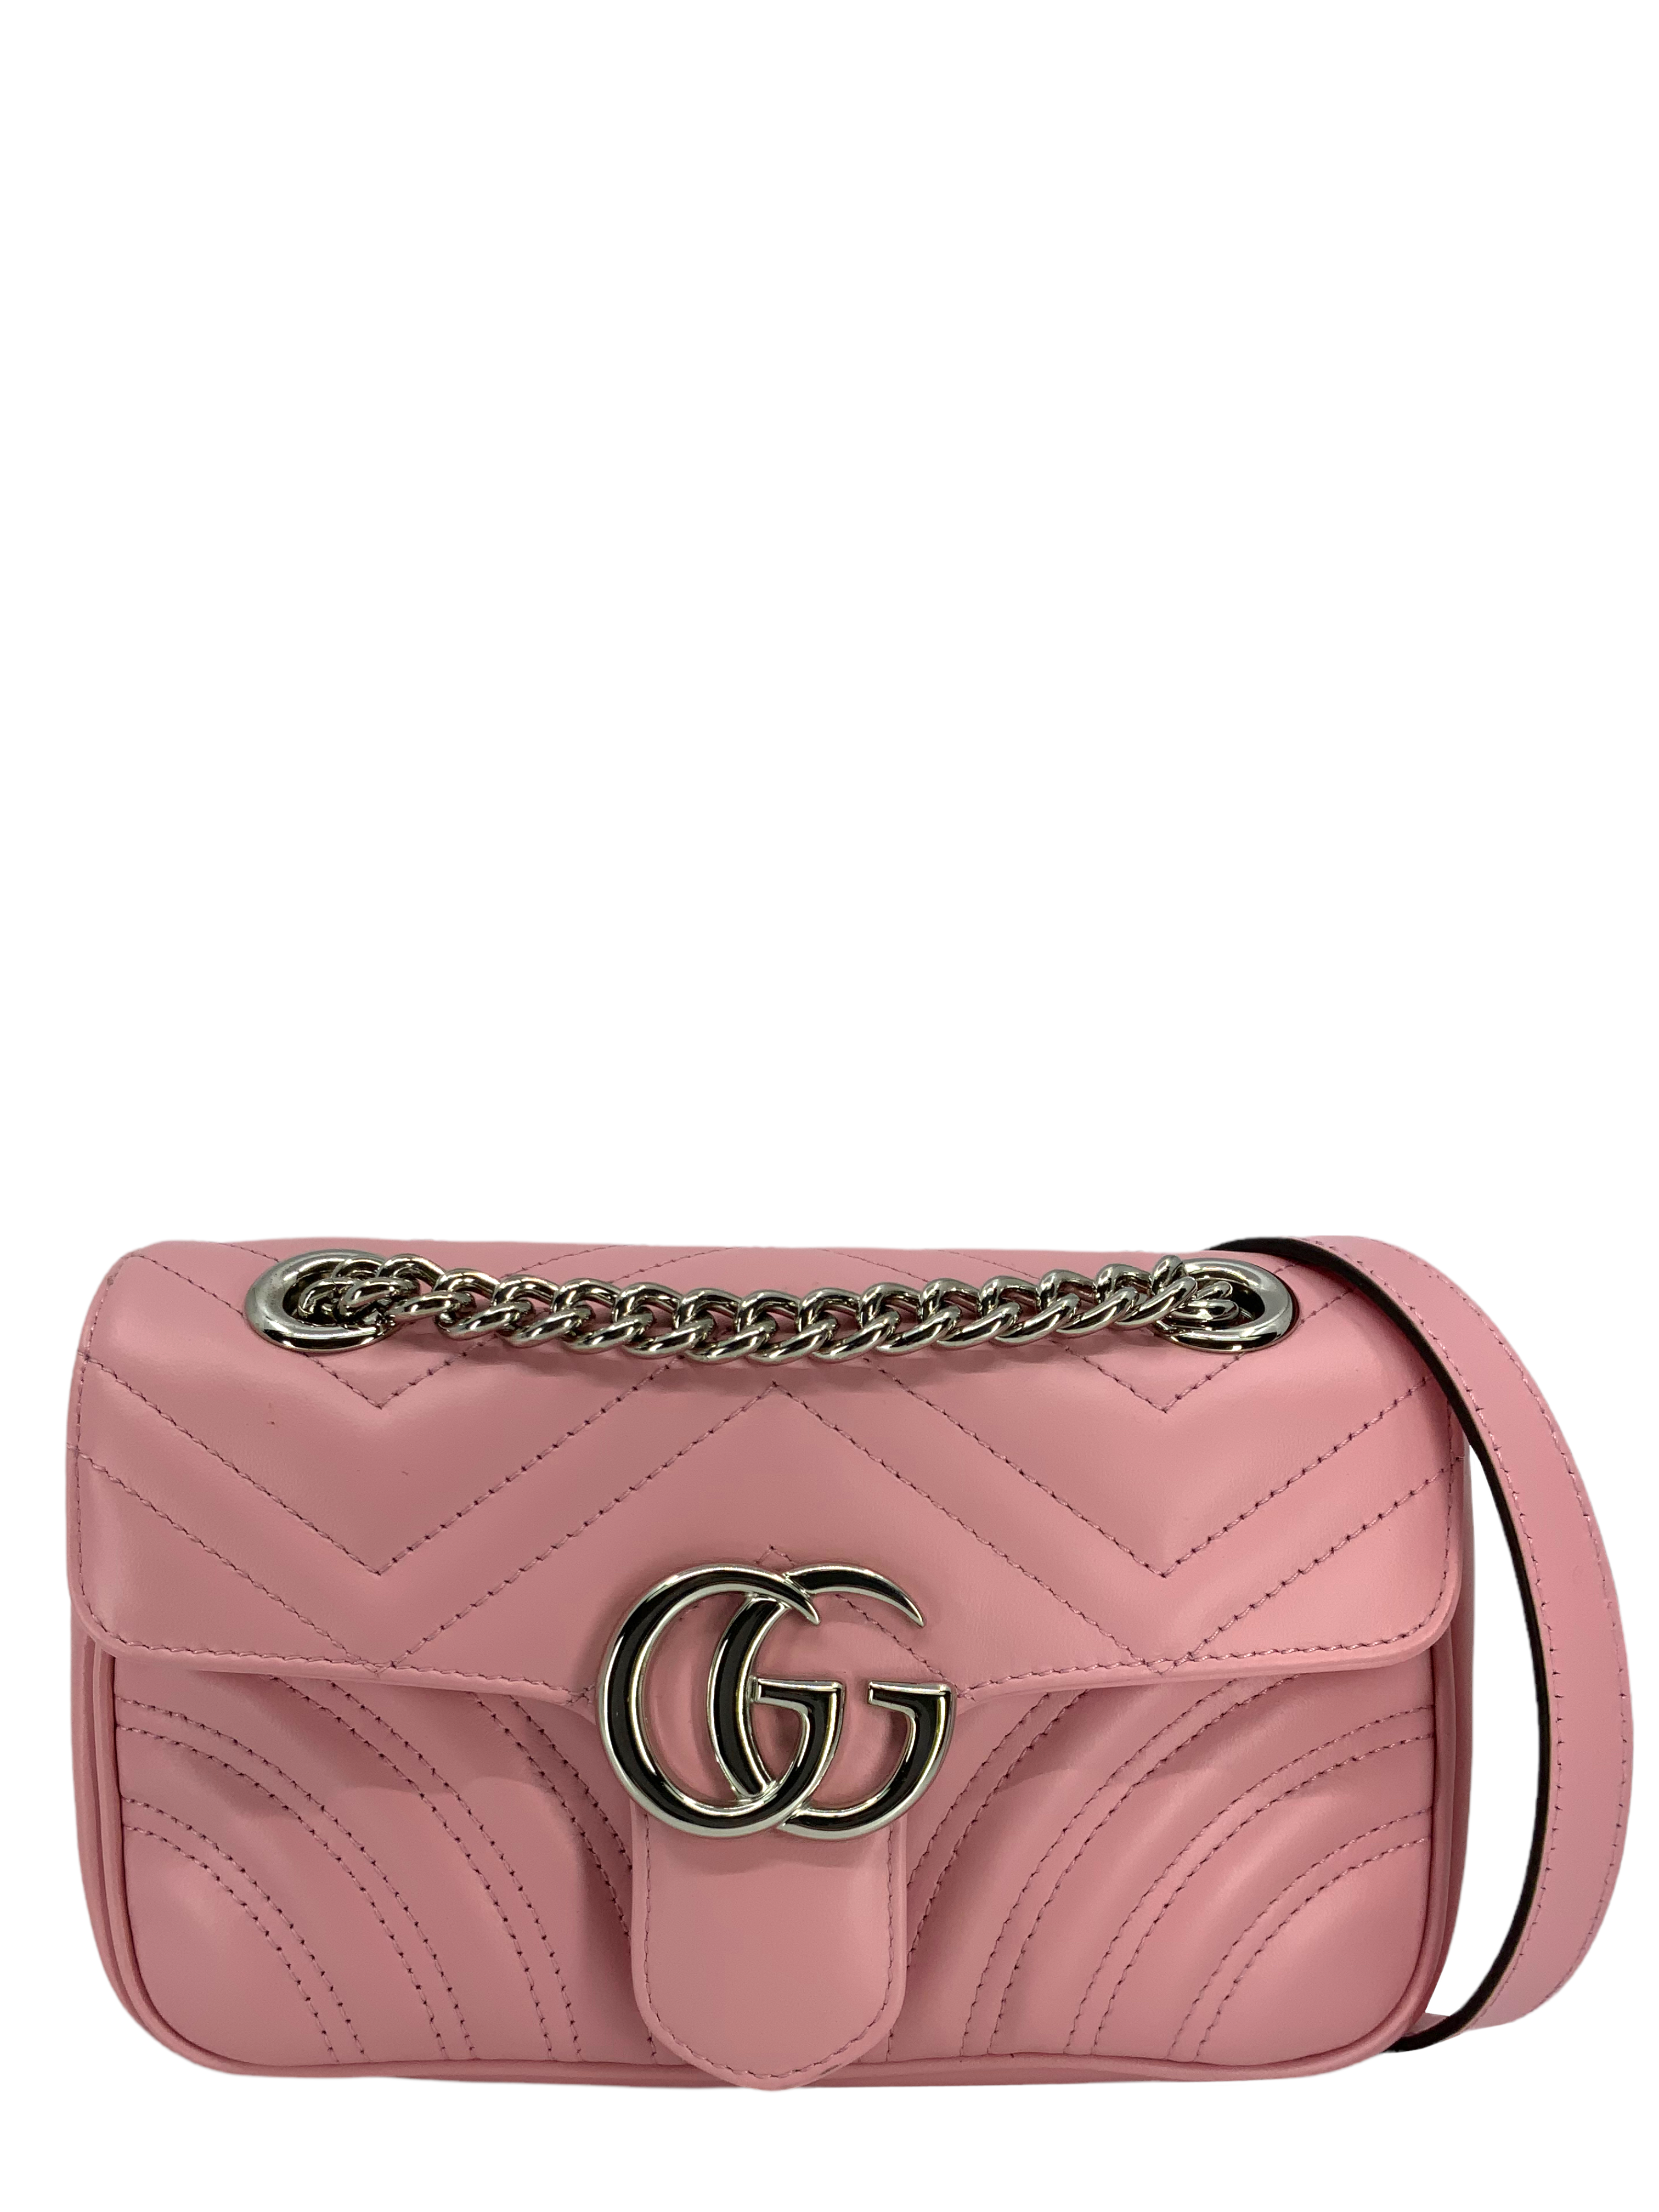 Gucci Women's Shoulder Bags, Authenticity Guaranteed